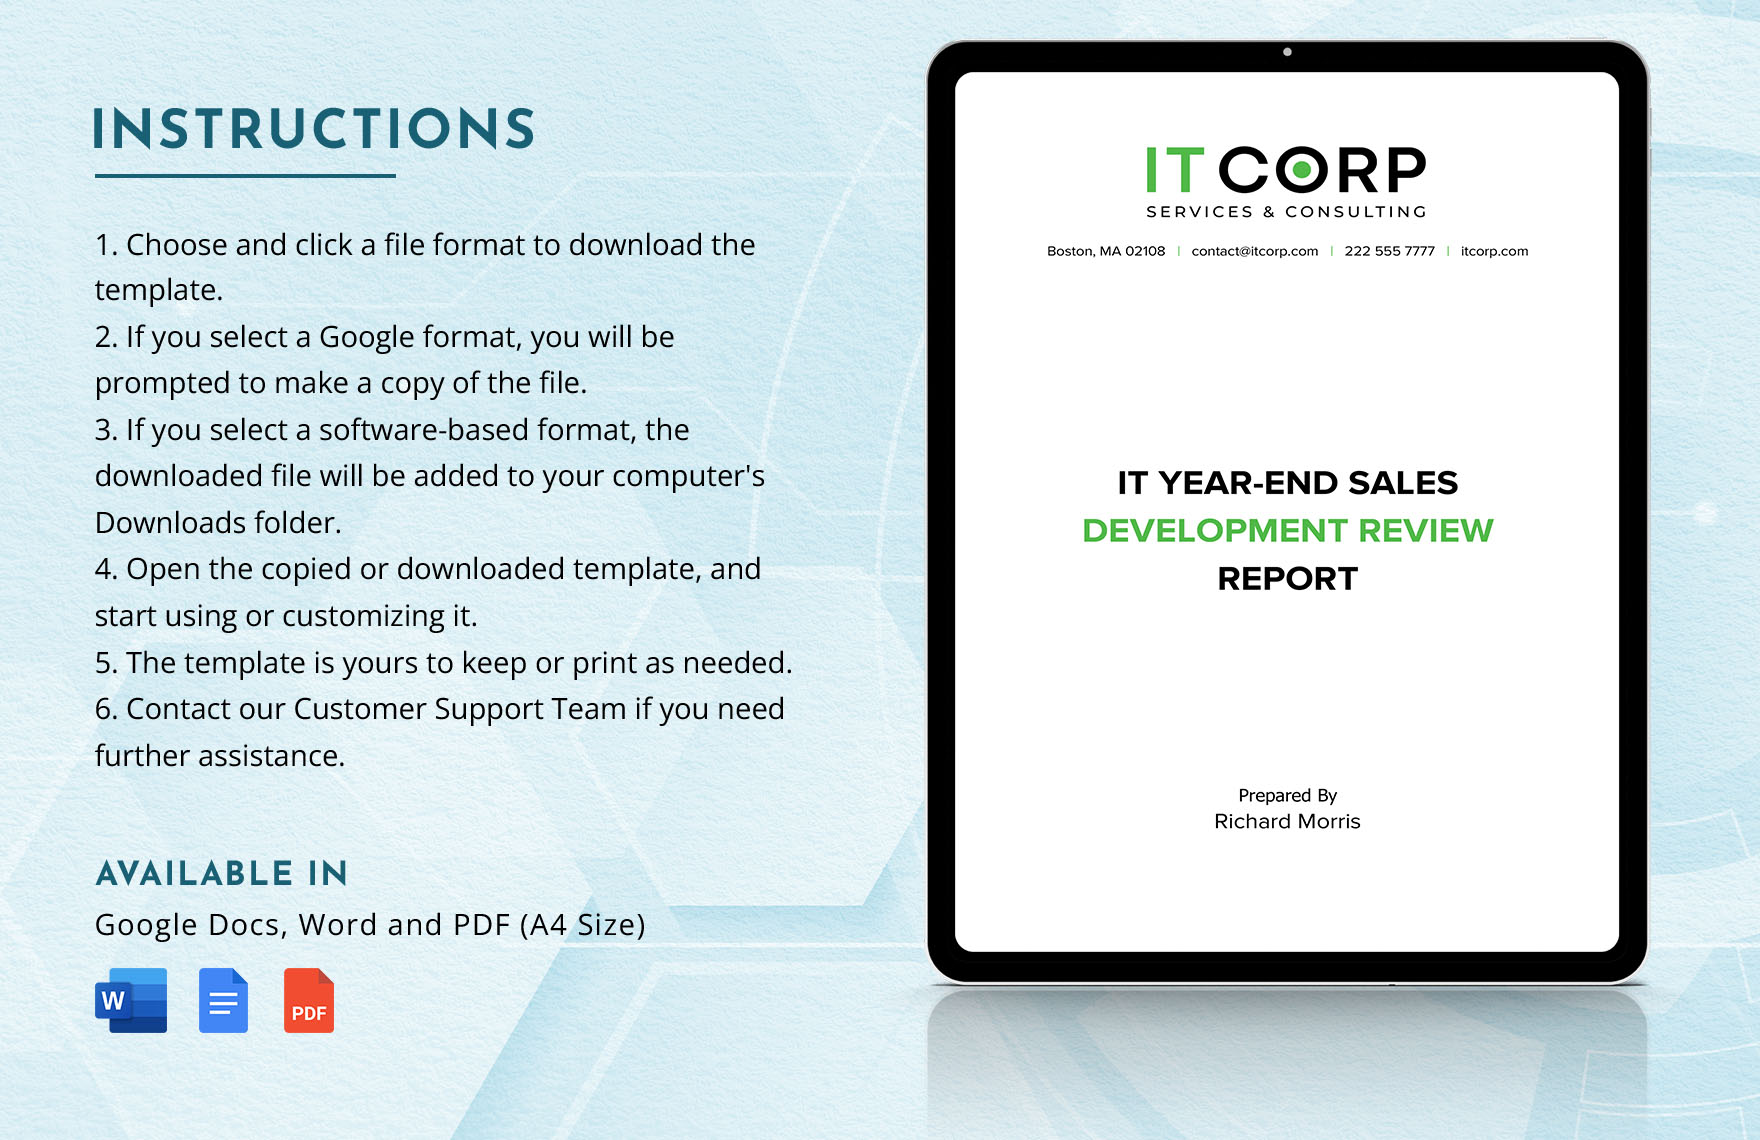 IT Year-end Sales Development Review Report Template